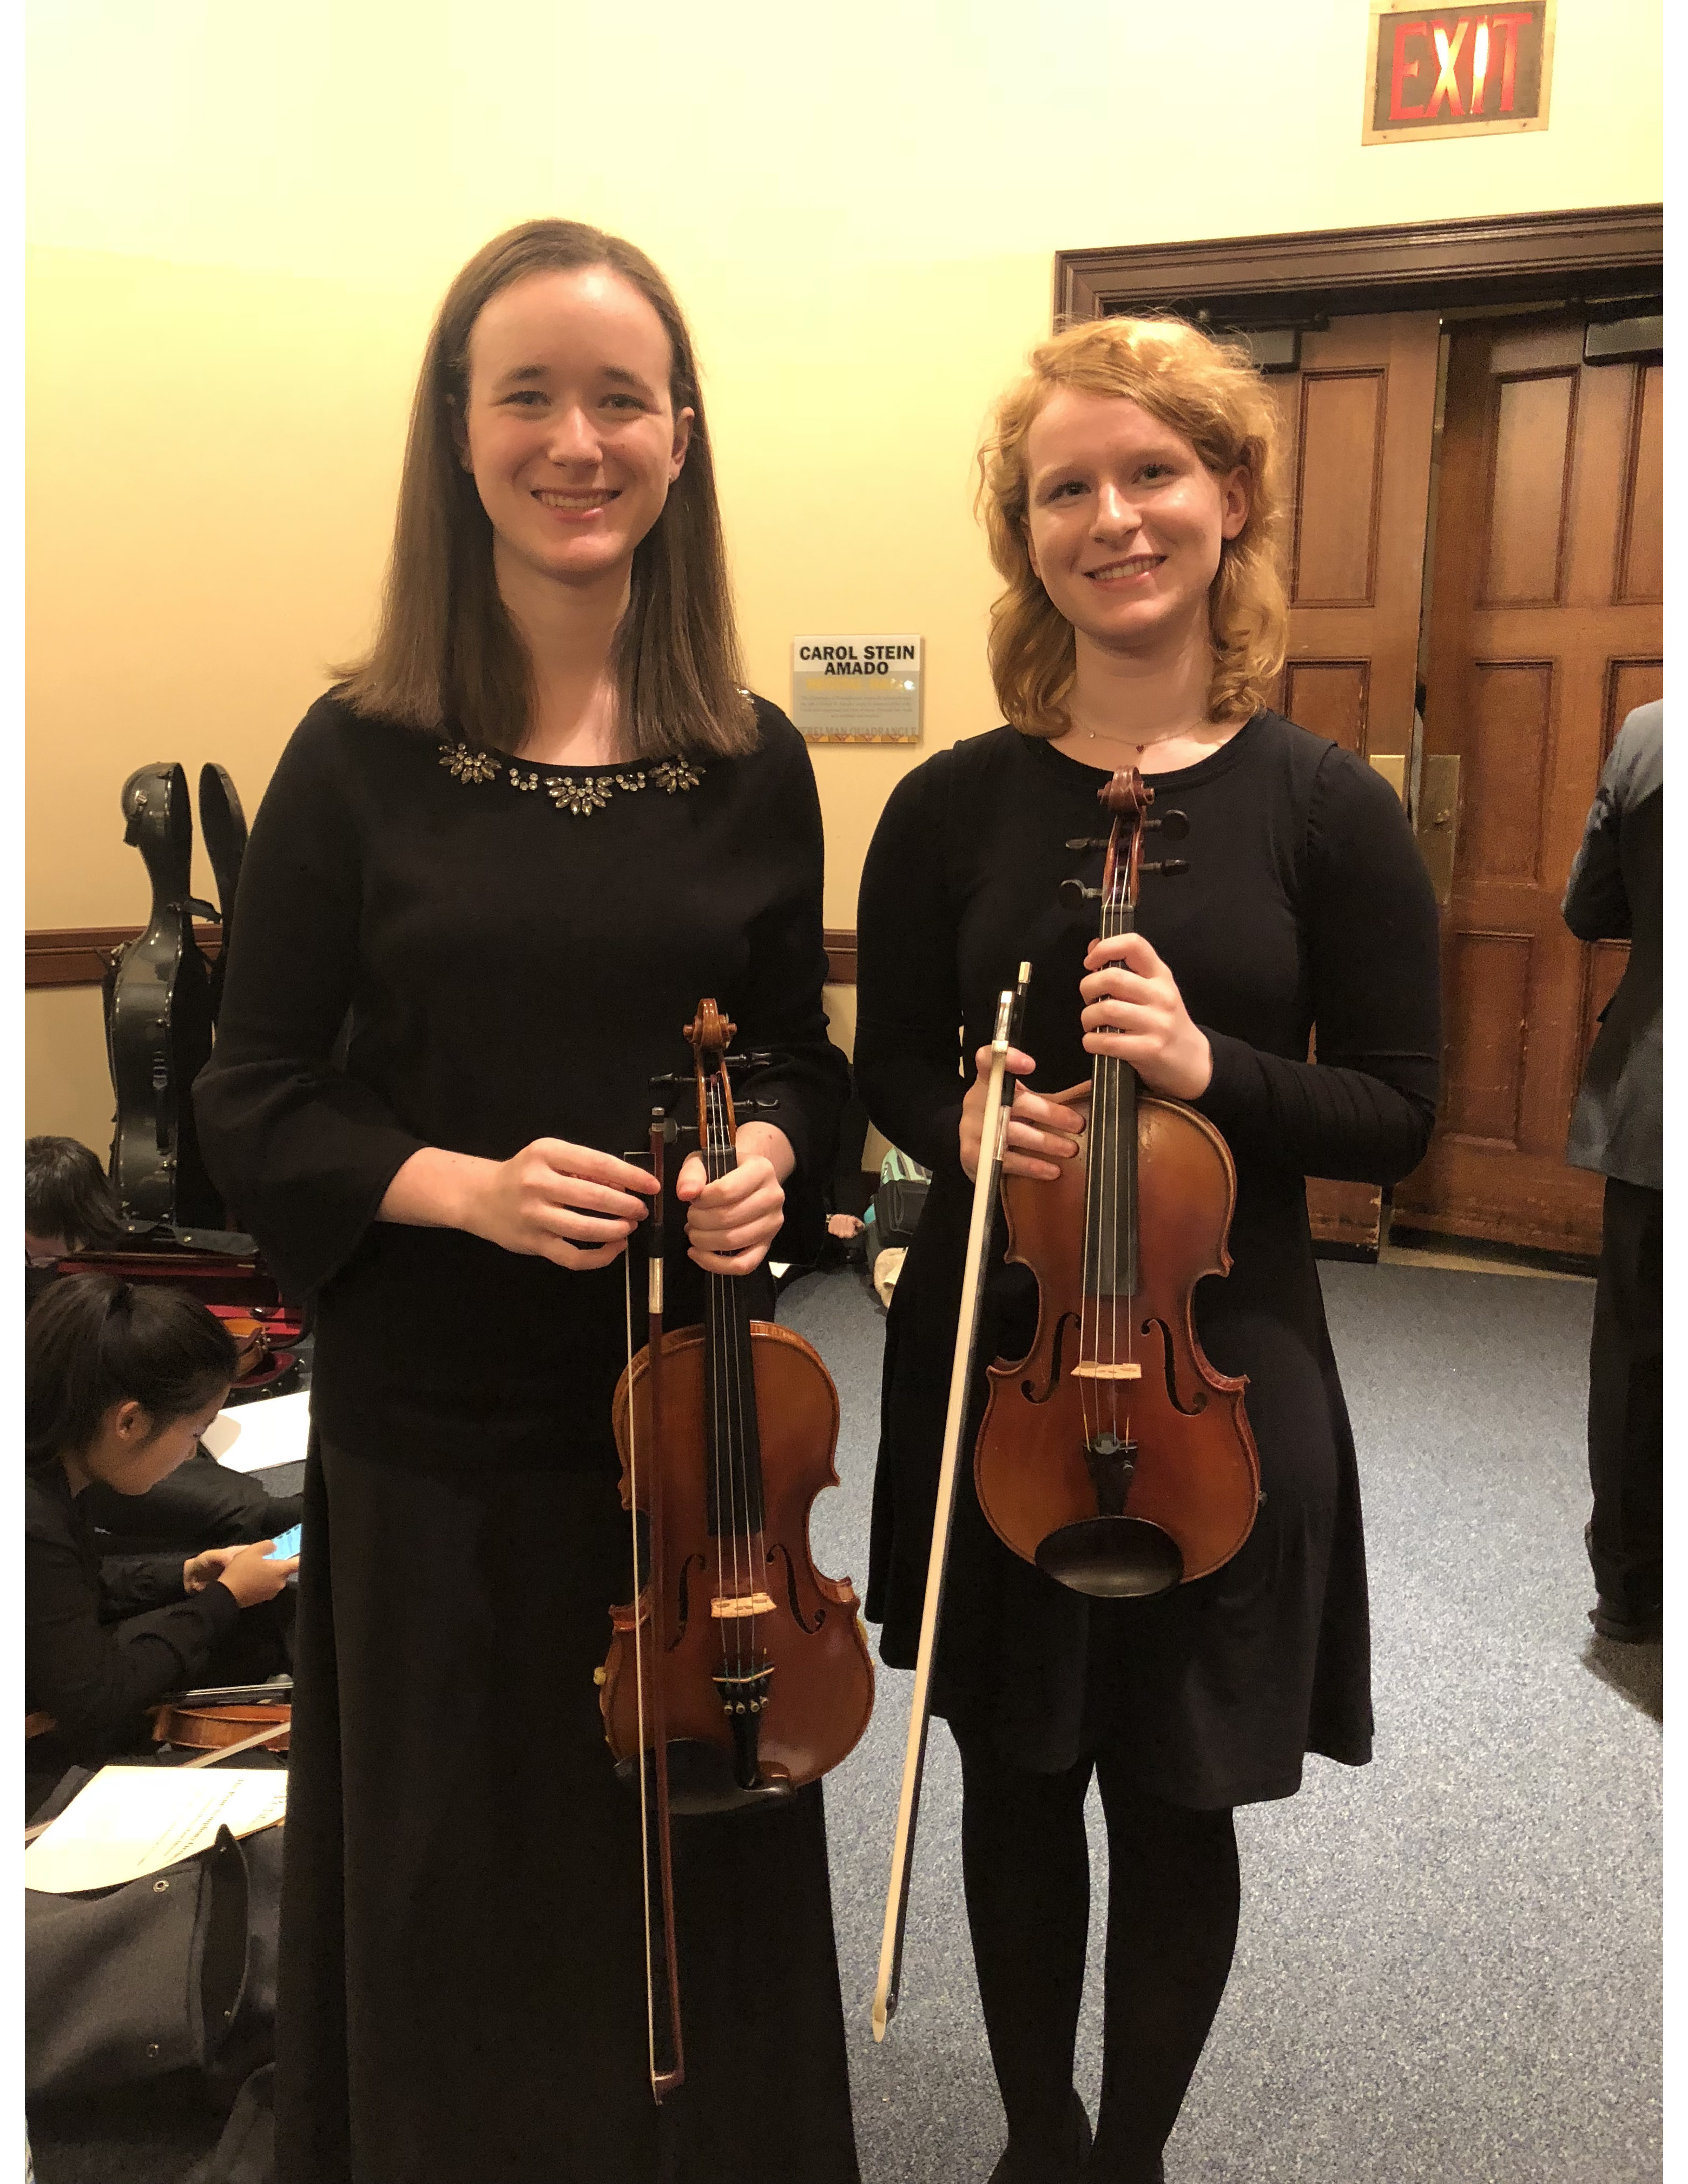 Two women in black hold violins